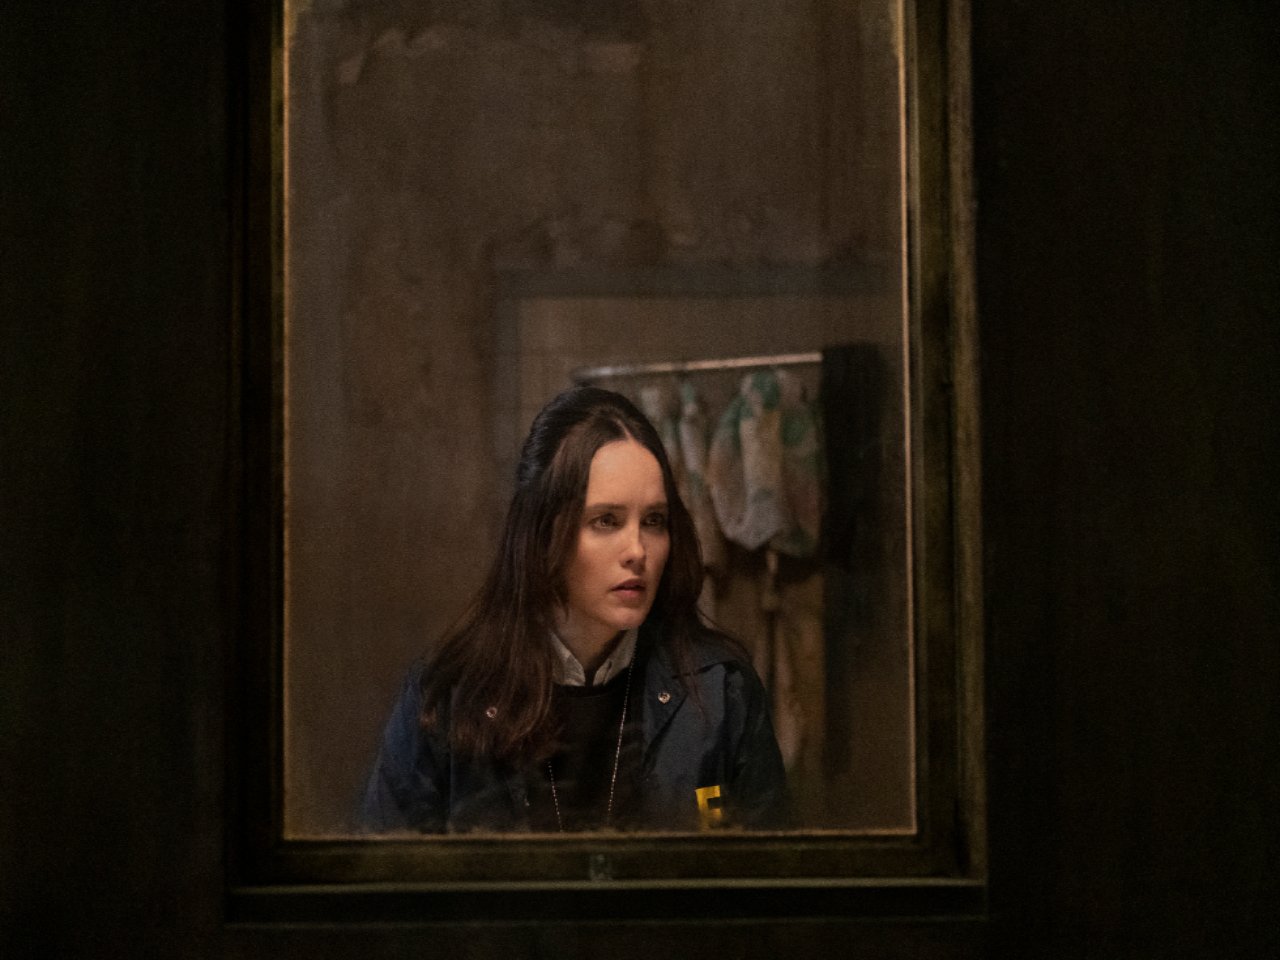 In a dimly lit room, a woman with long brown hair looks into a smudged mirror.